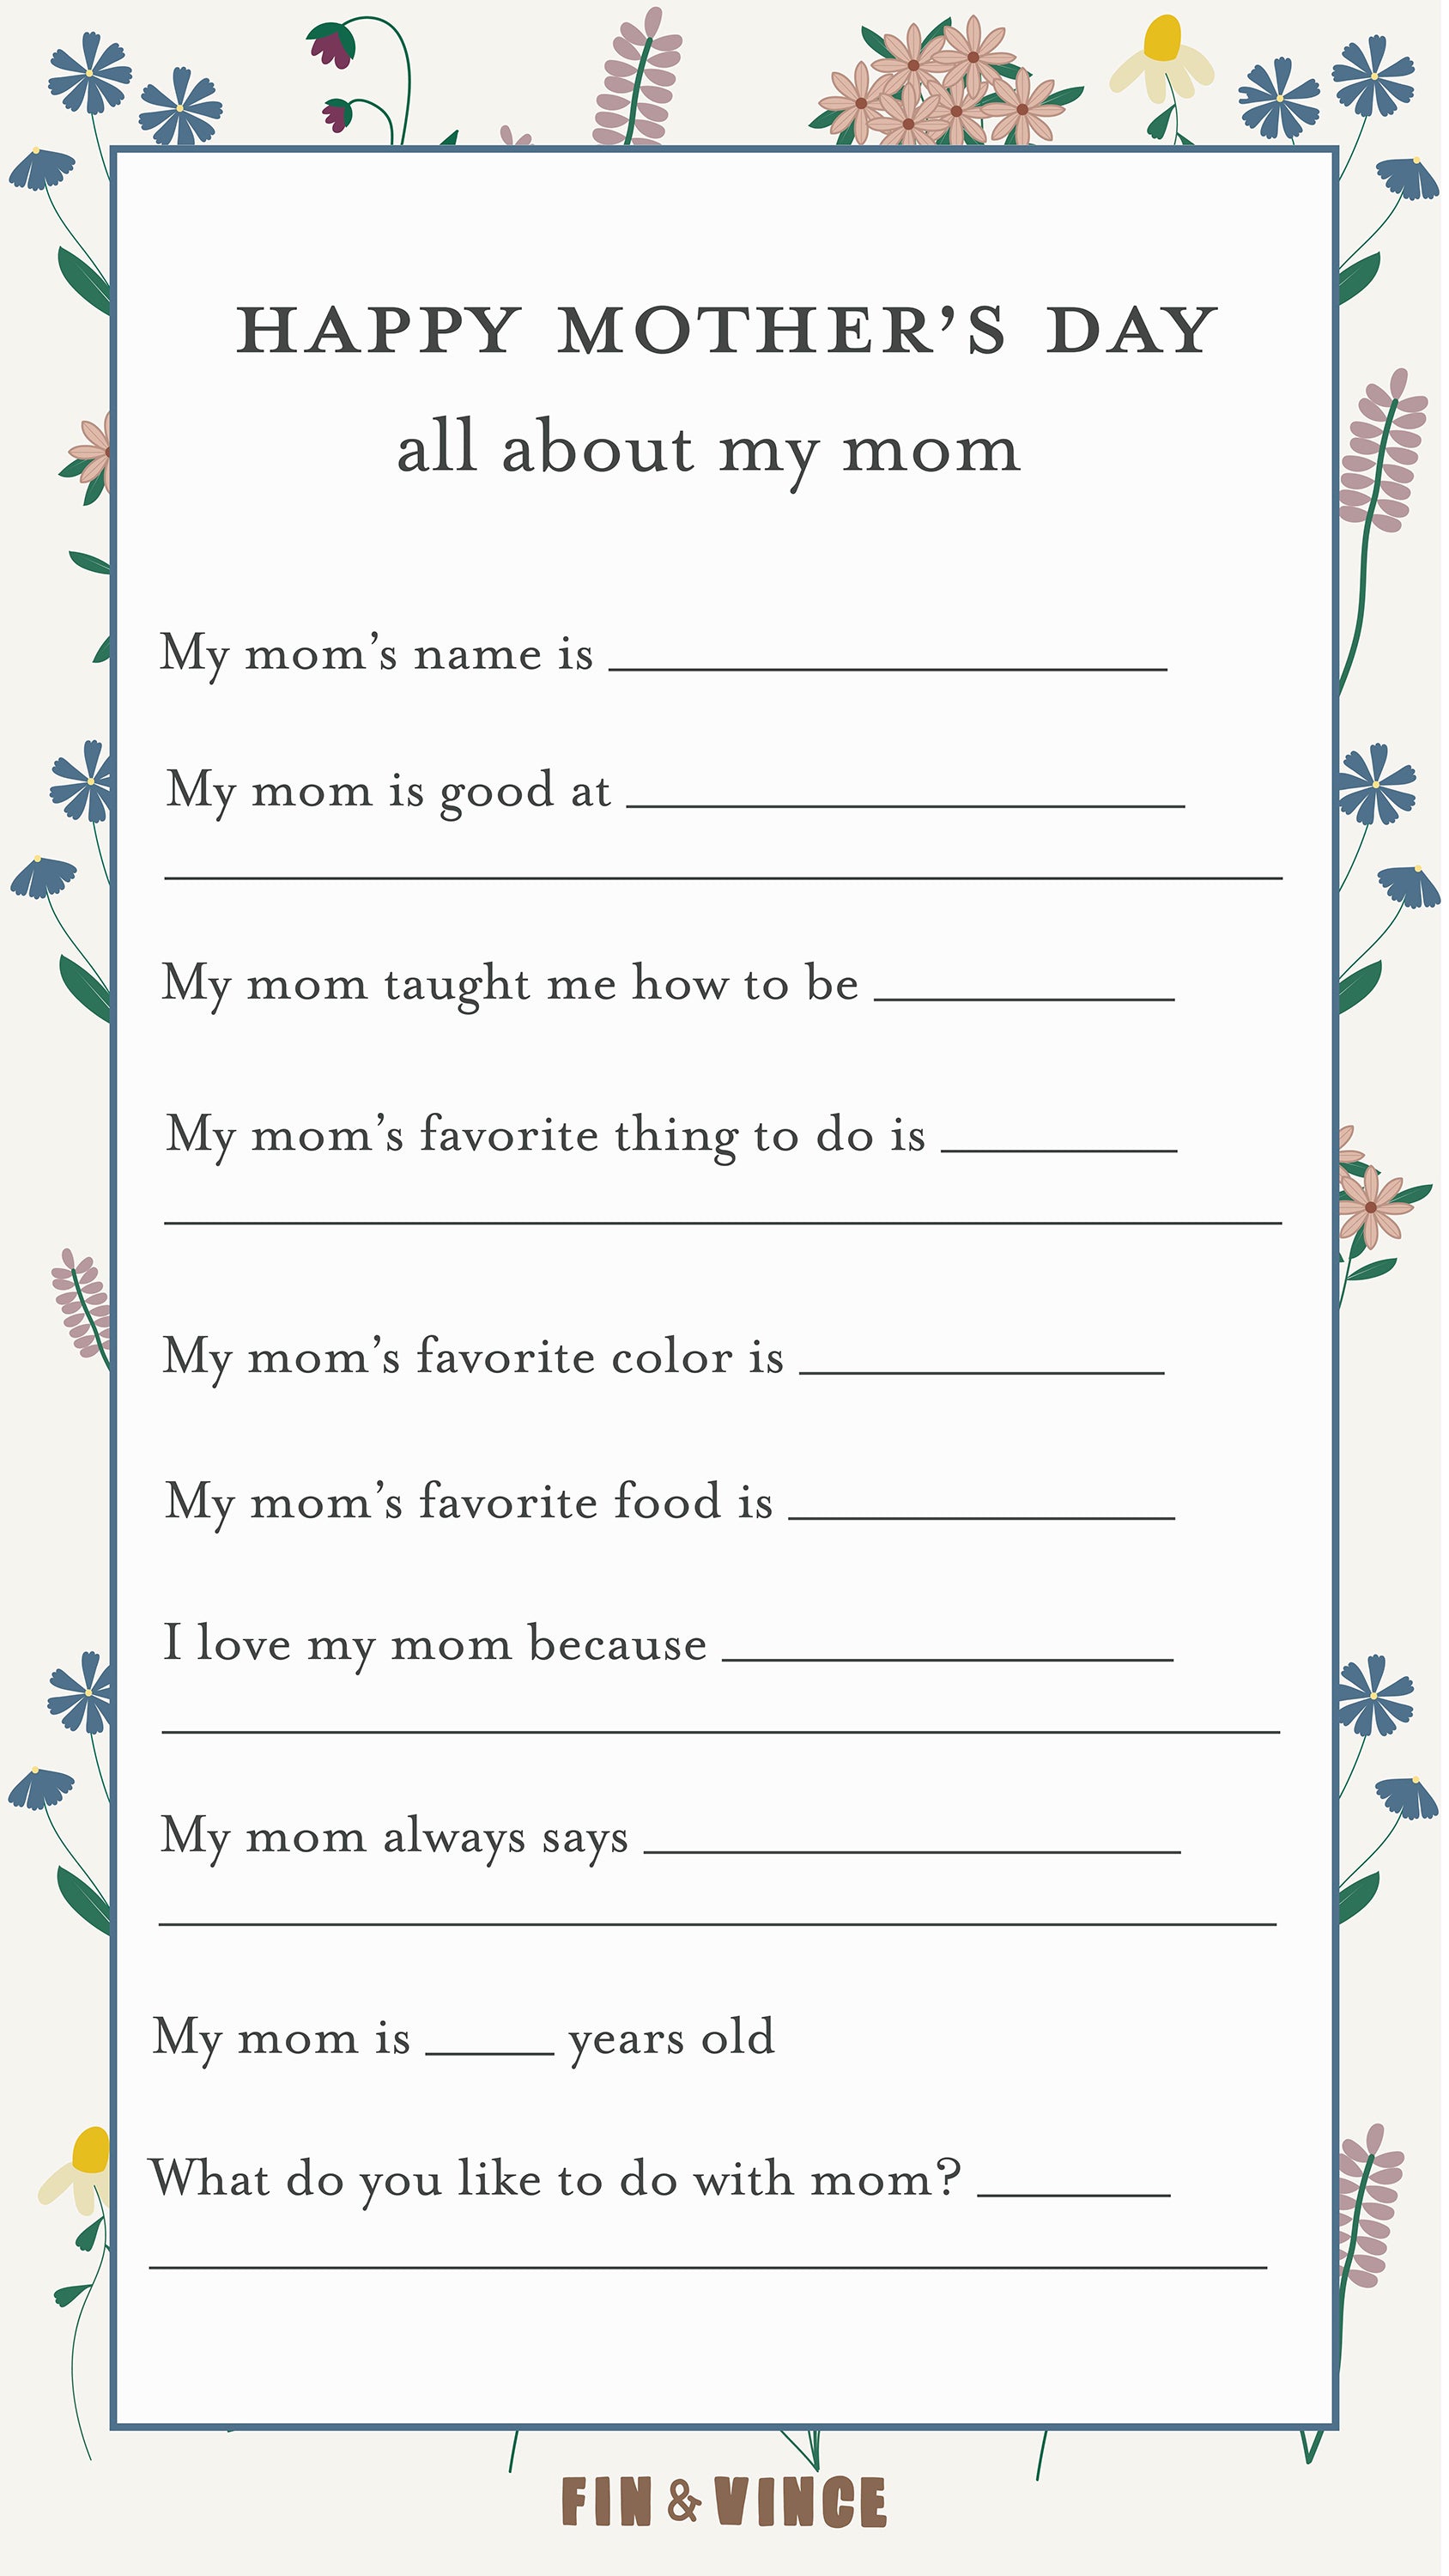 Mother’s Day questionnaire - free printable – Fin & Vince